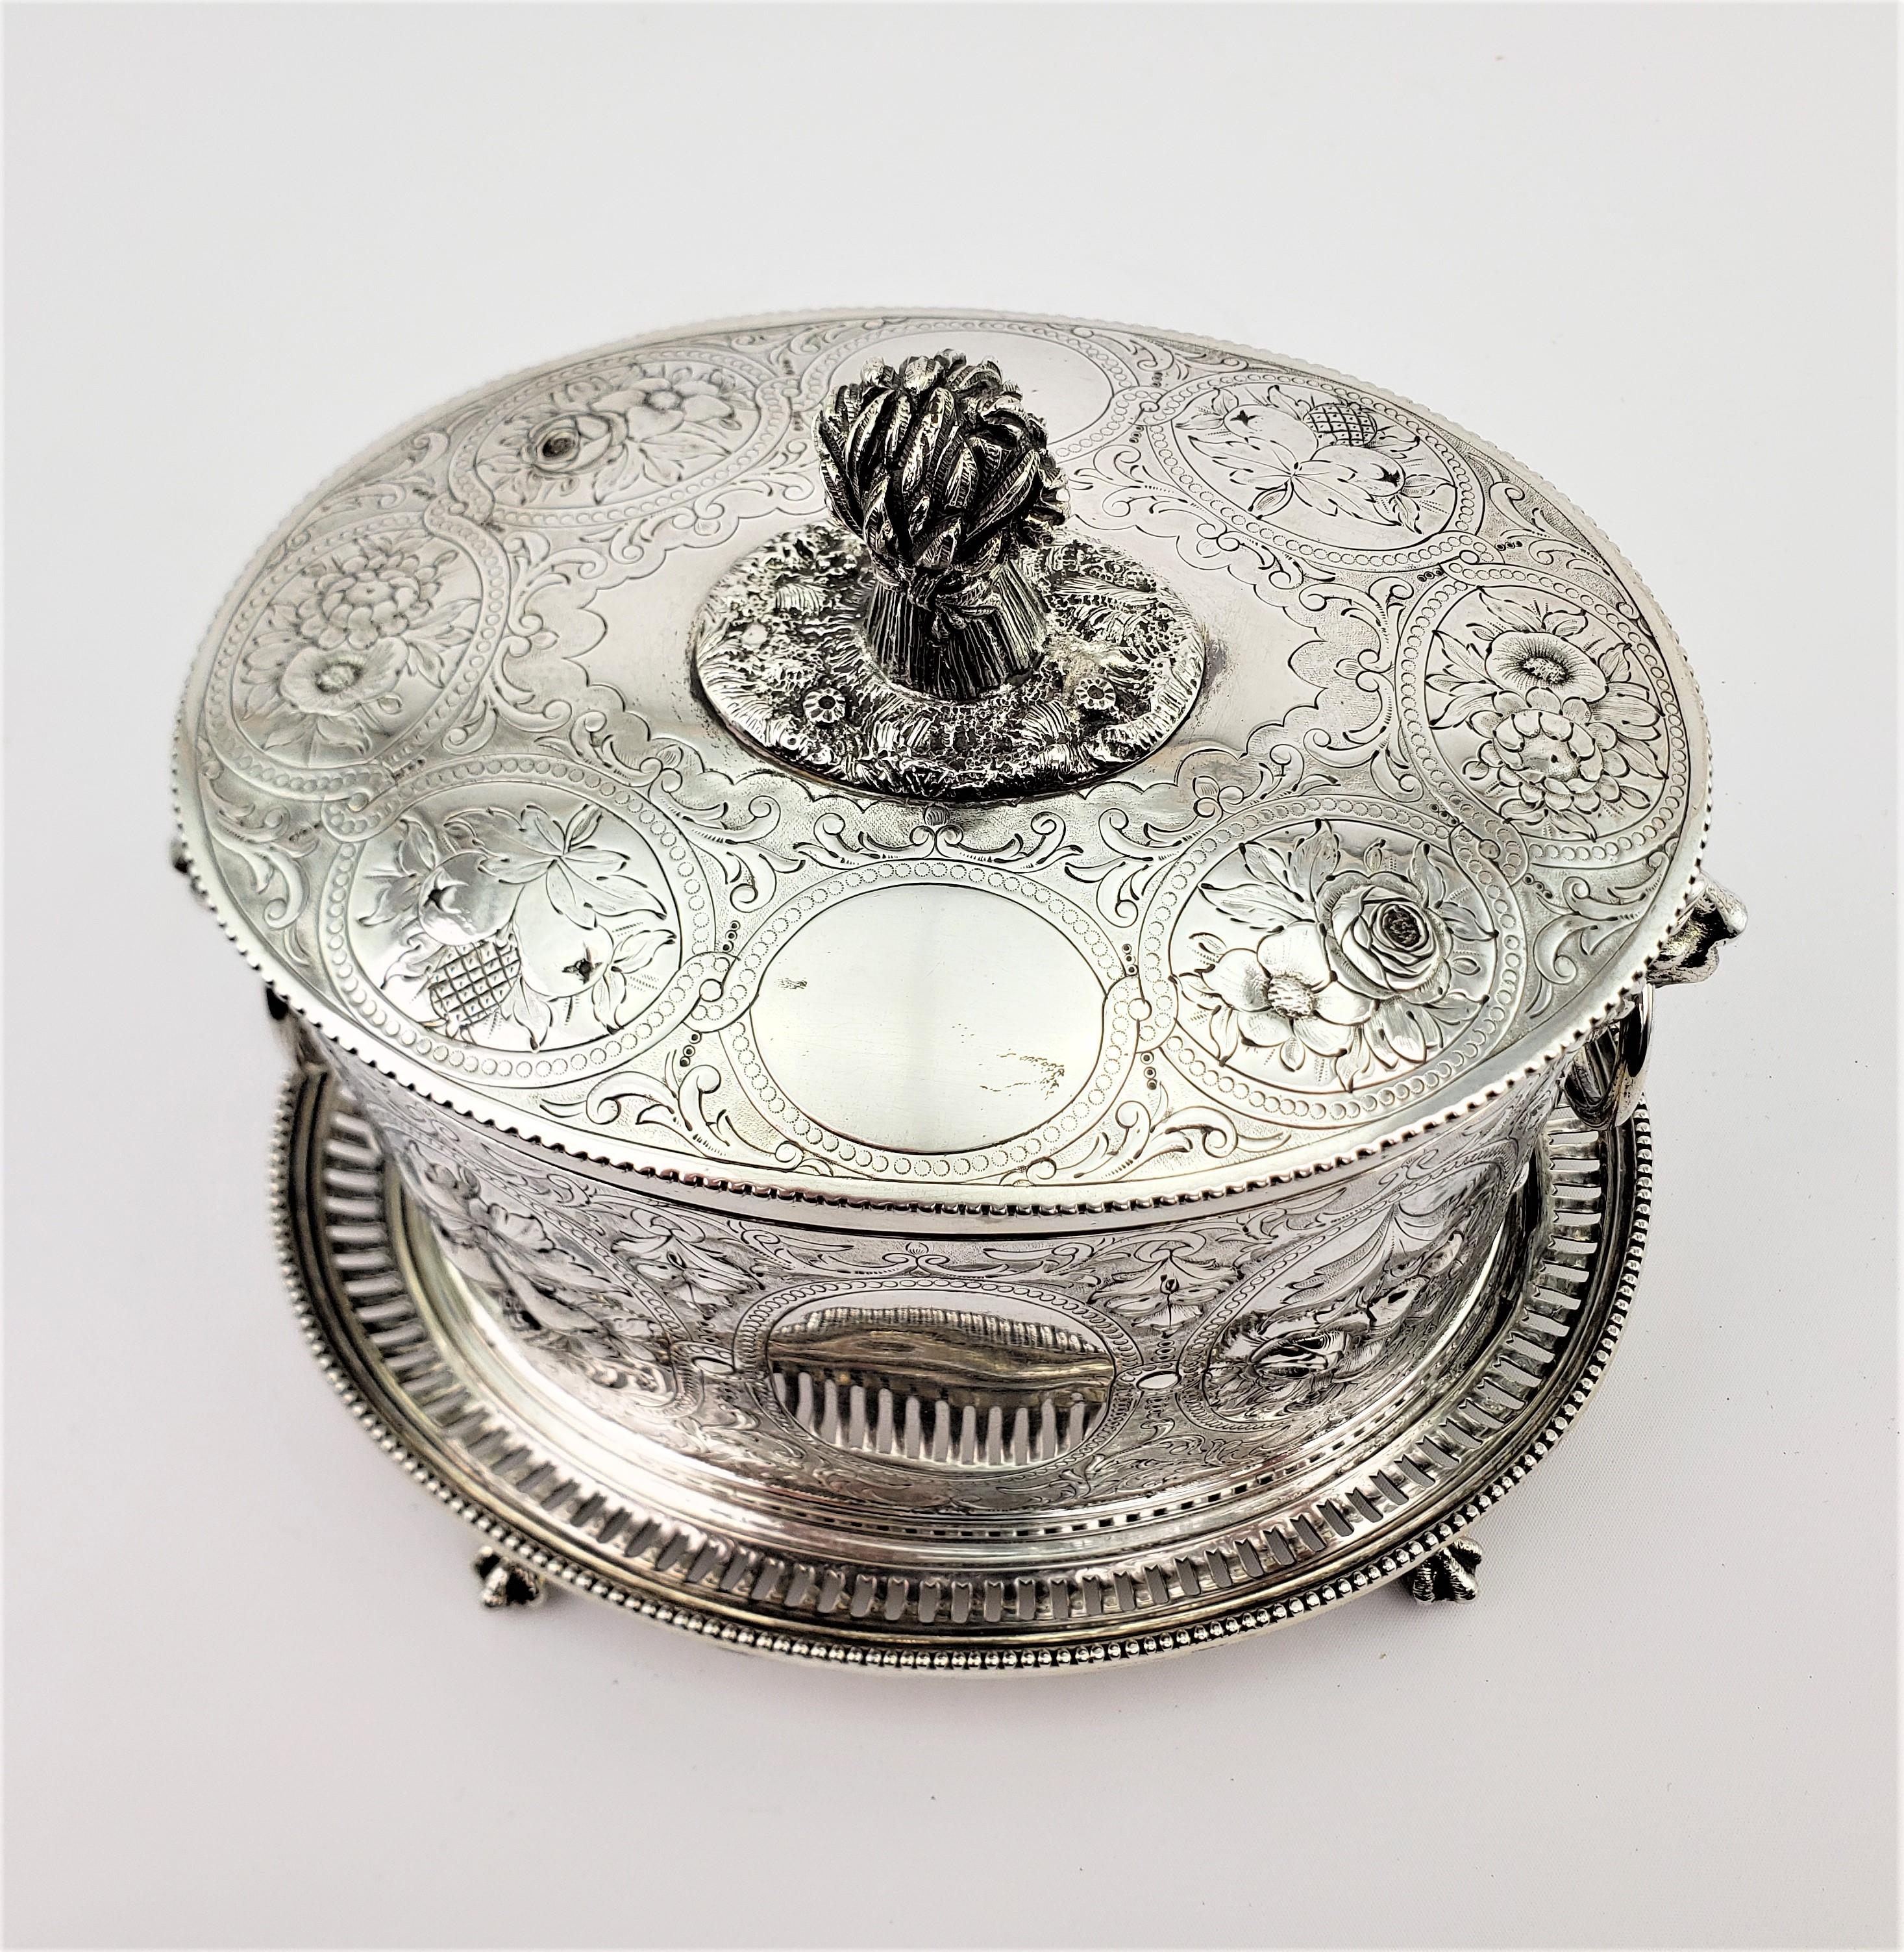 Engraved Antique English Silver Plated Oval Biscuit Barrel with Harvest Decoration